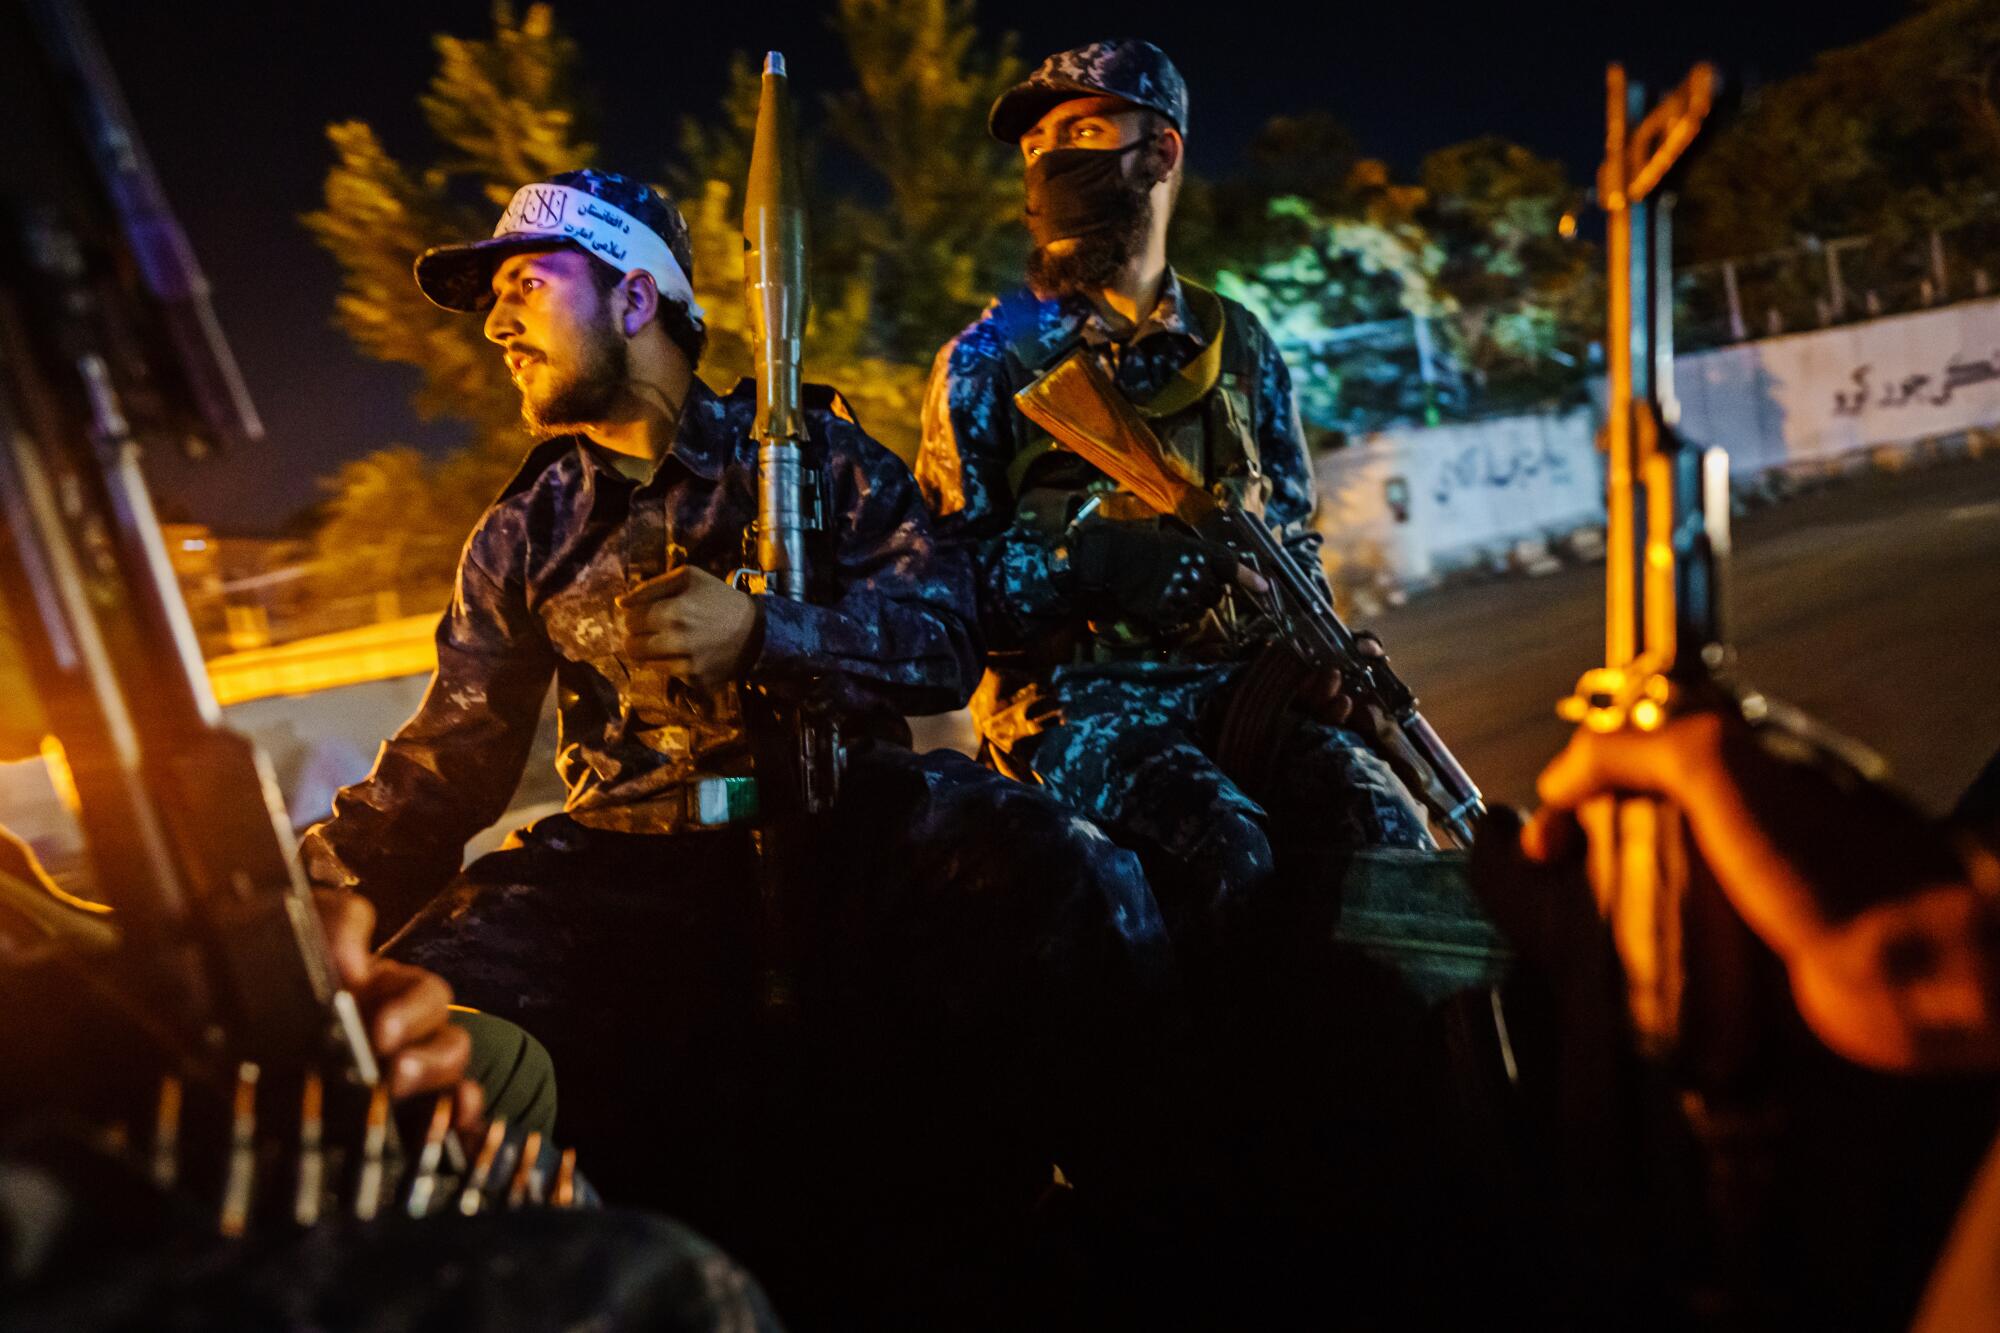 Men with rifles ride in a vehicle at night